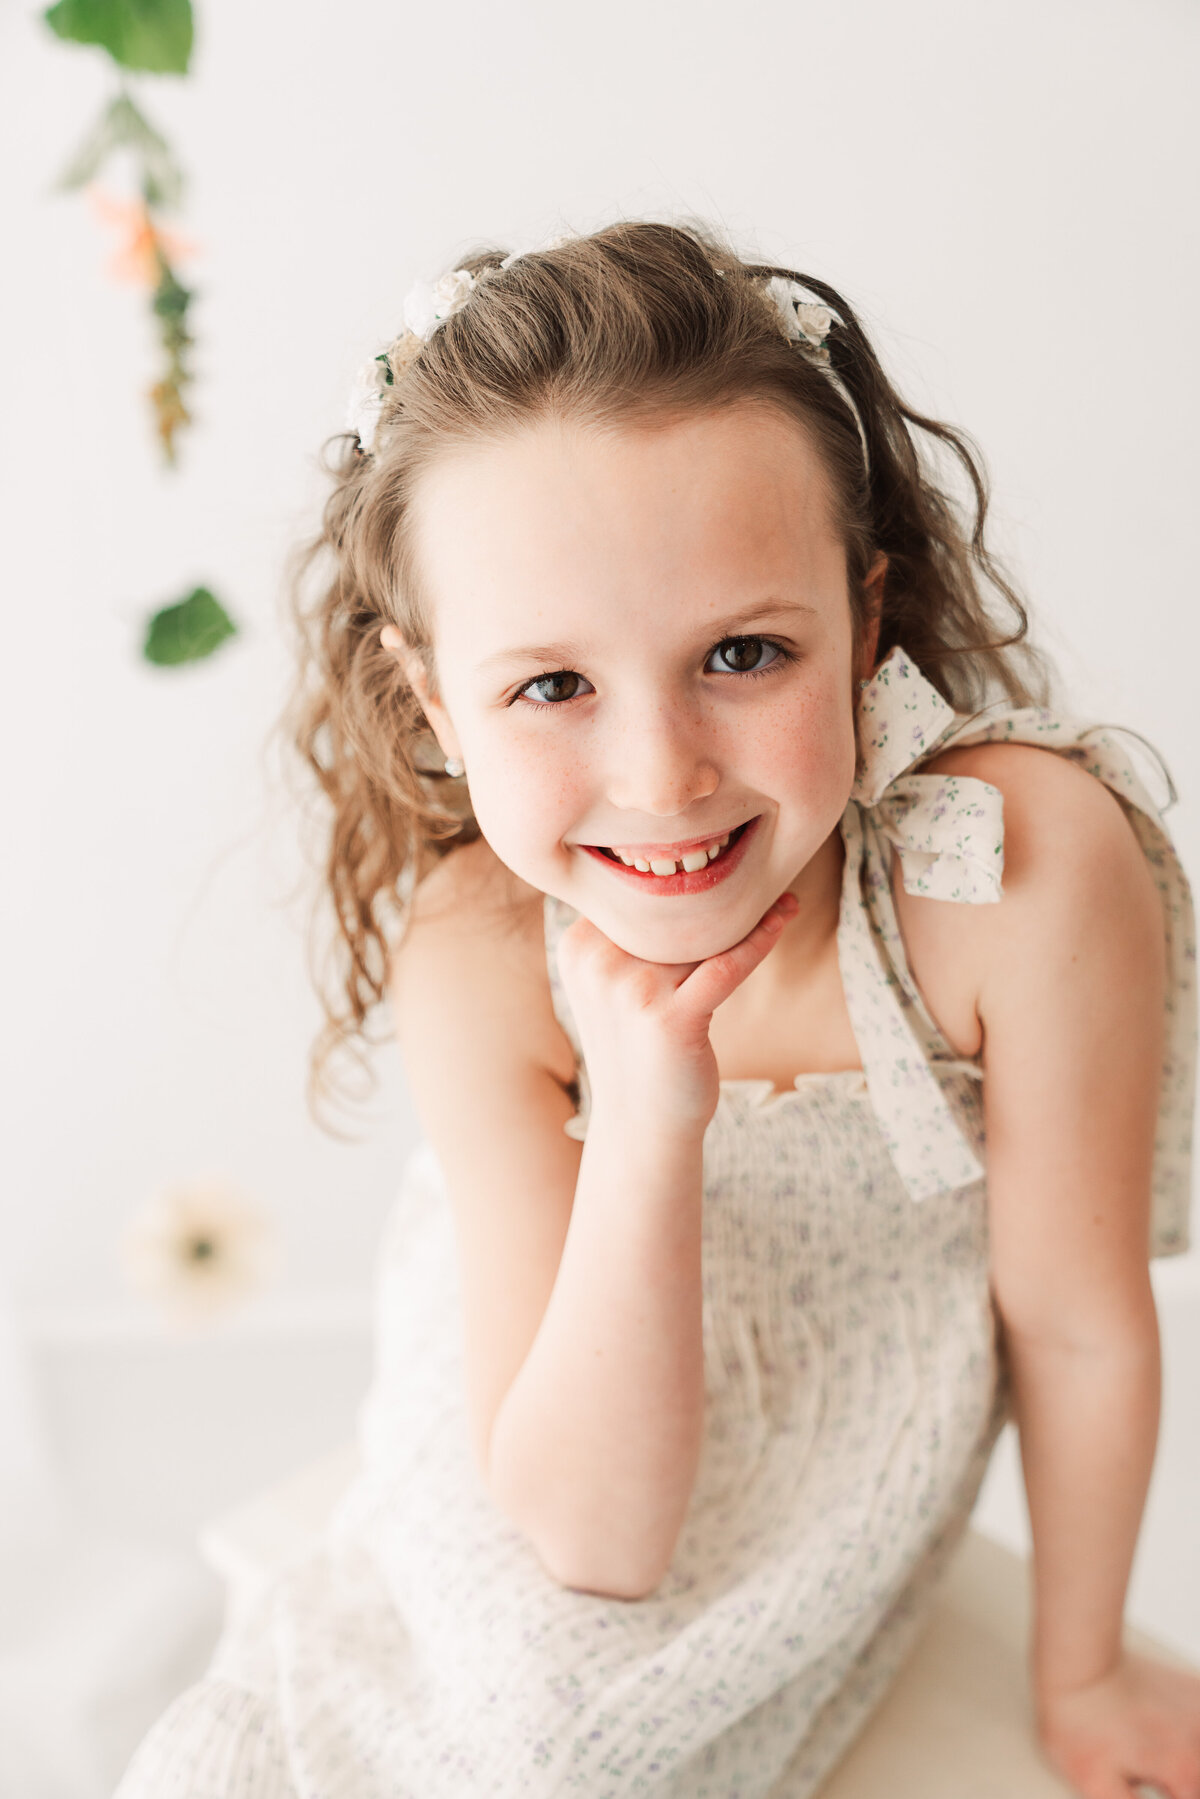 A cheerful young girl with curly hair and a floral hairband smiles brightly while posing in a light, airy room.